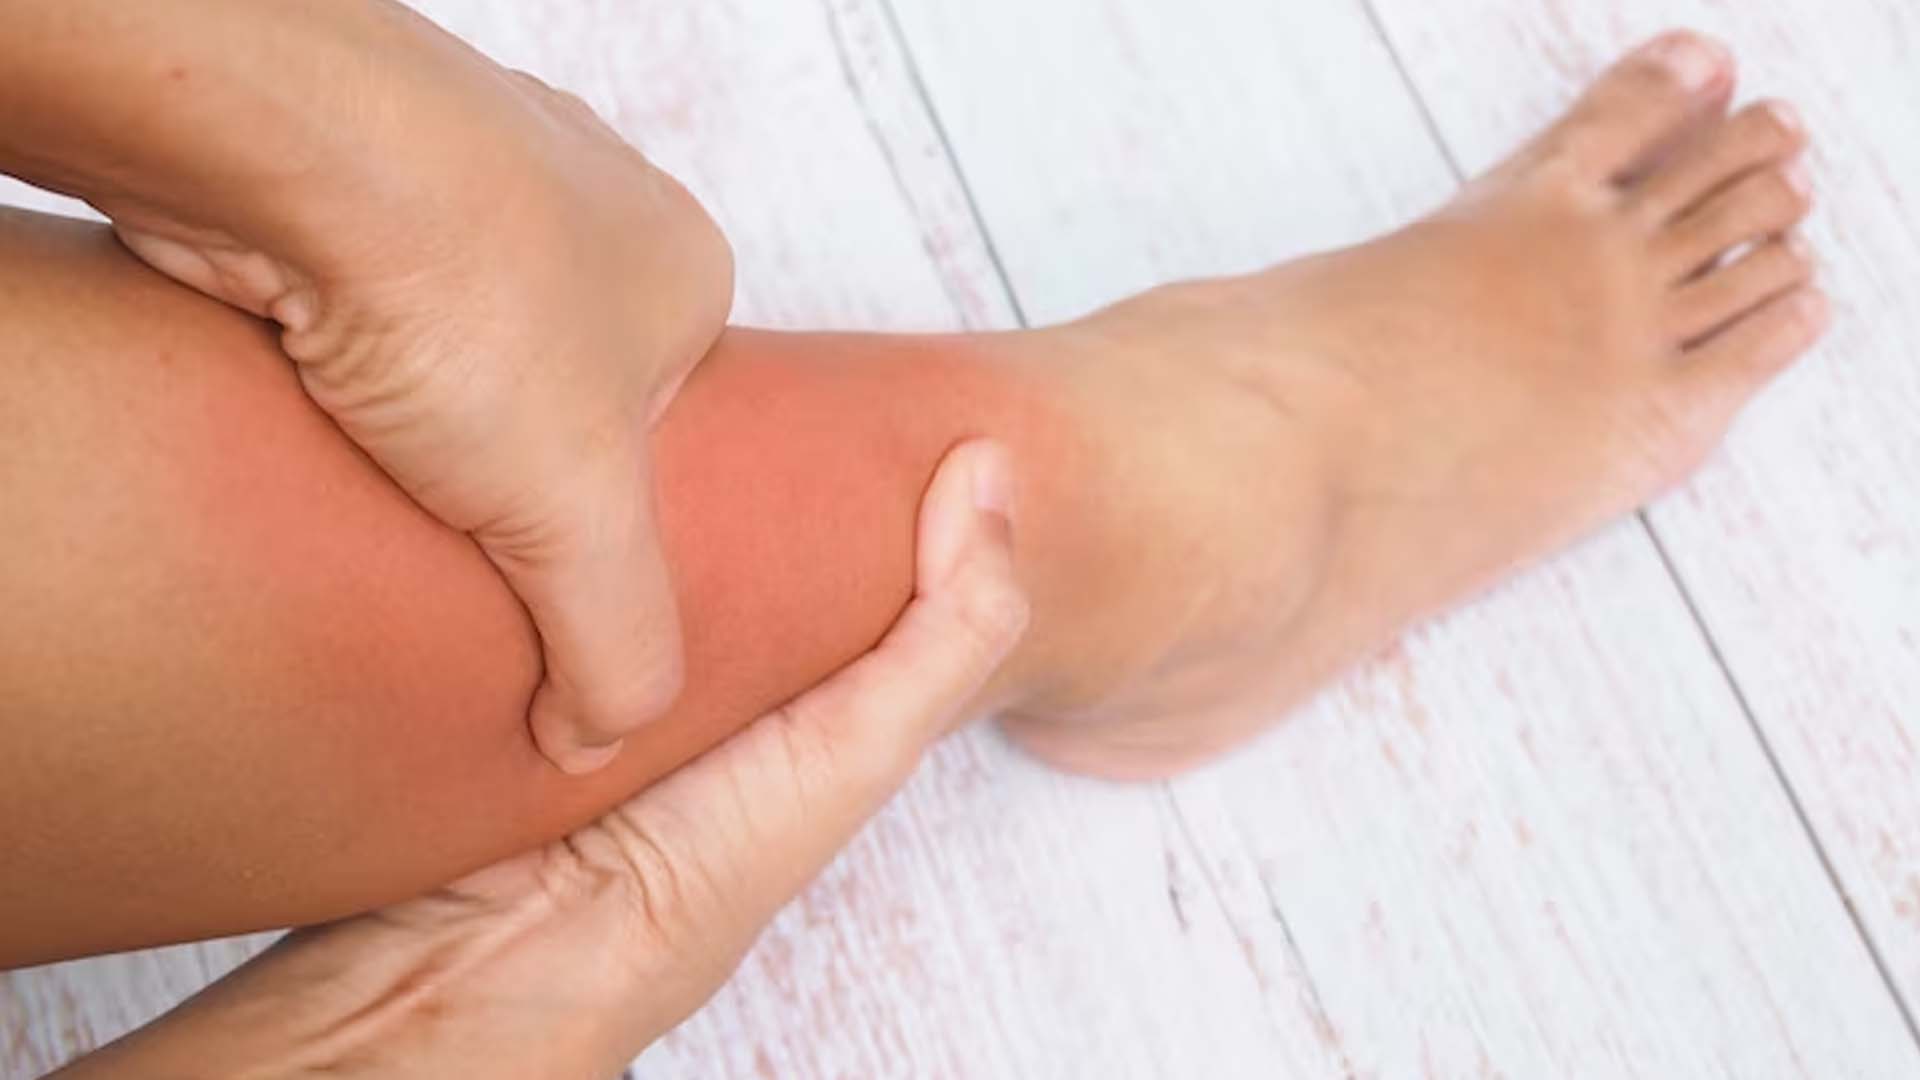 What are the Home Remedies for Edema?